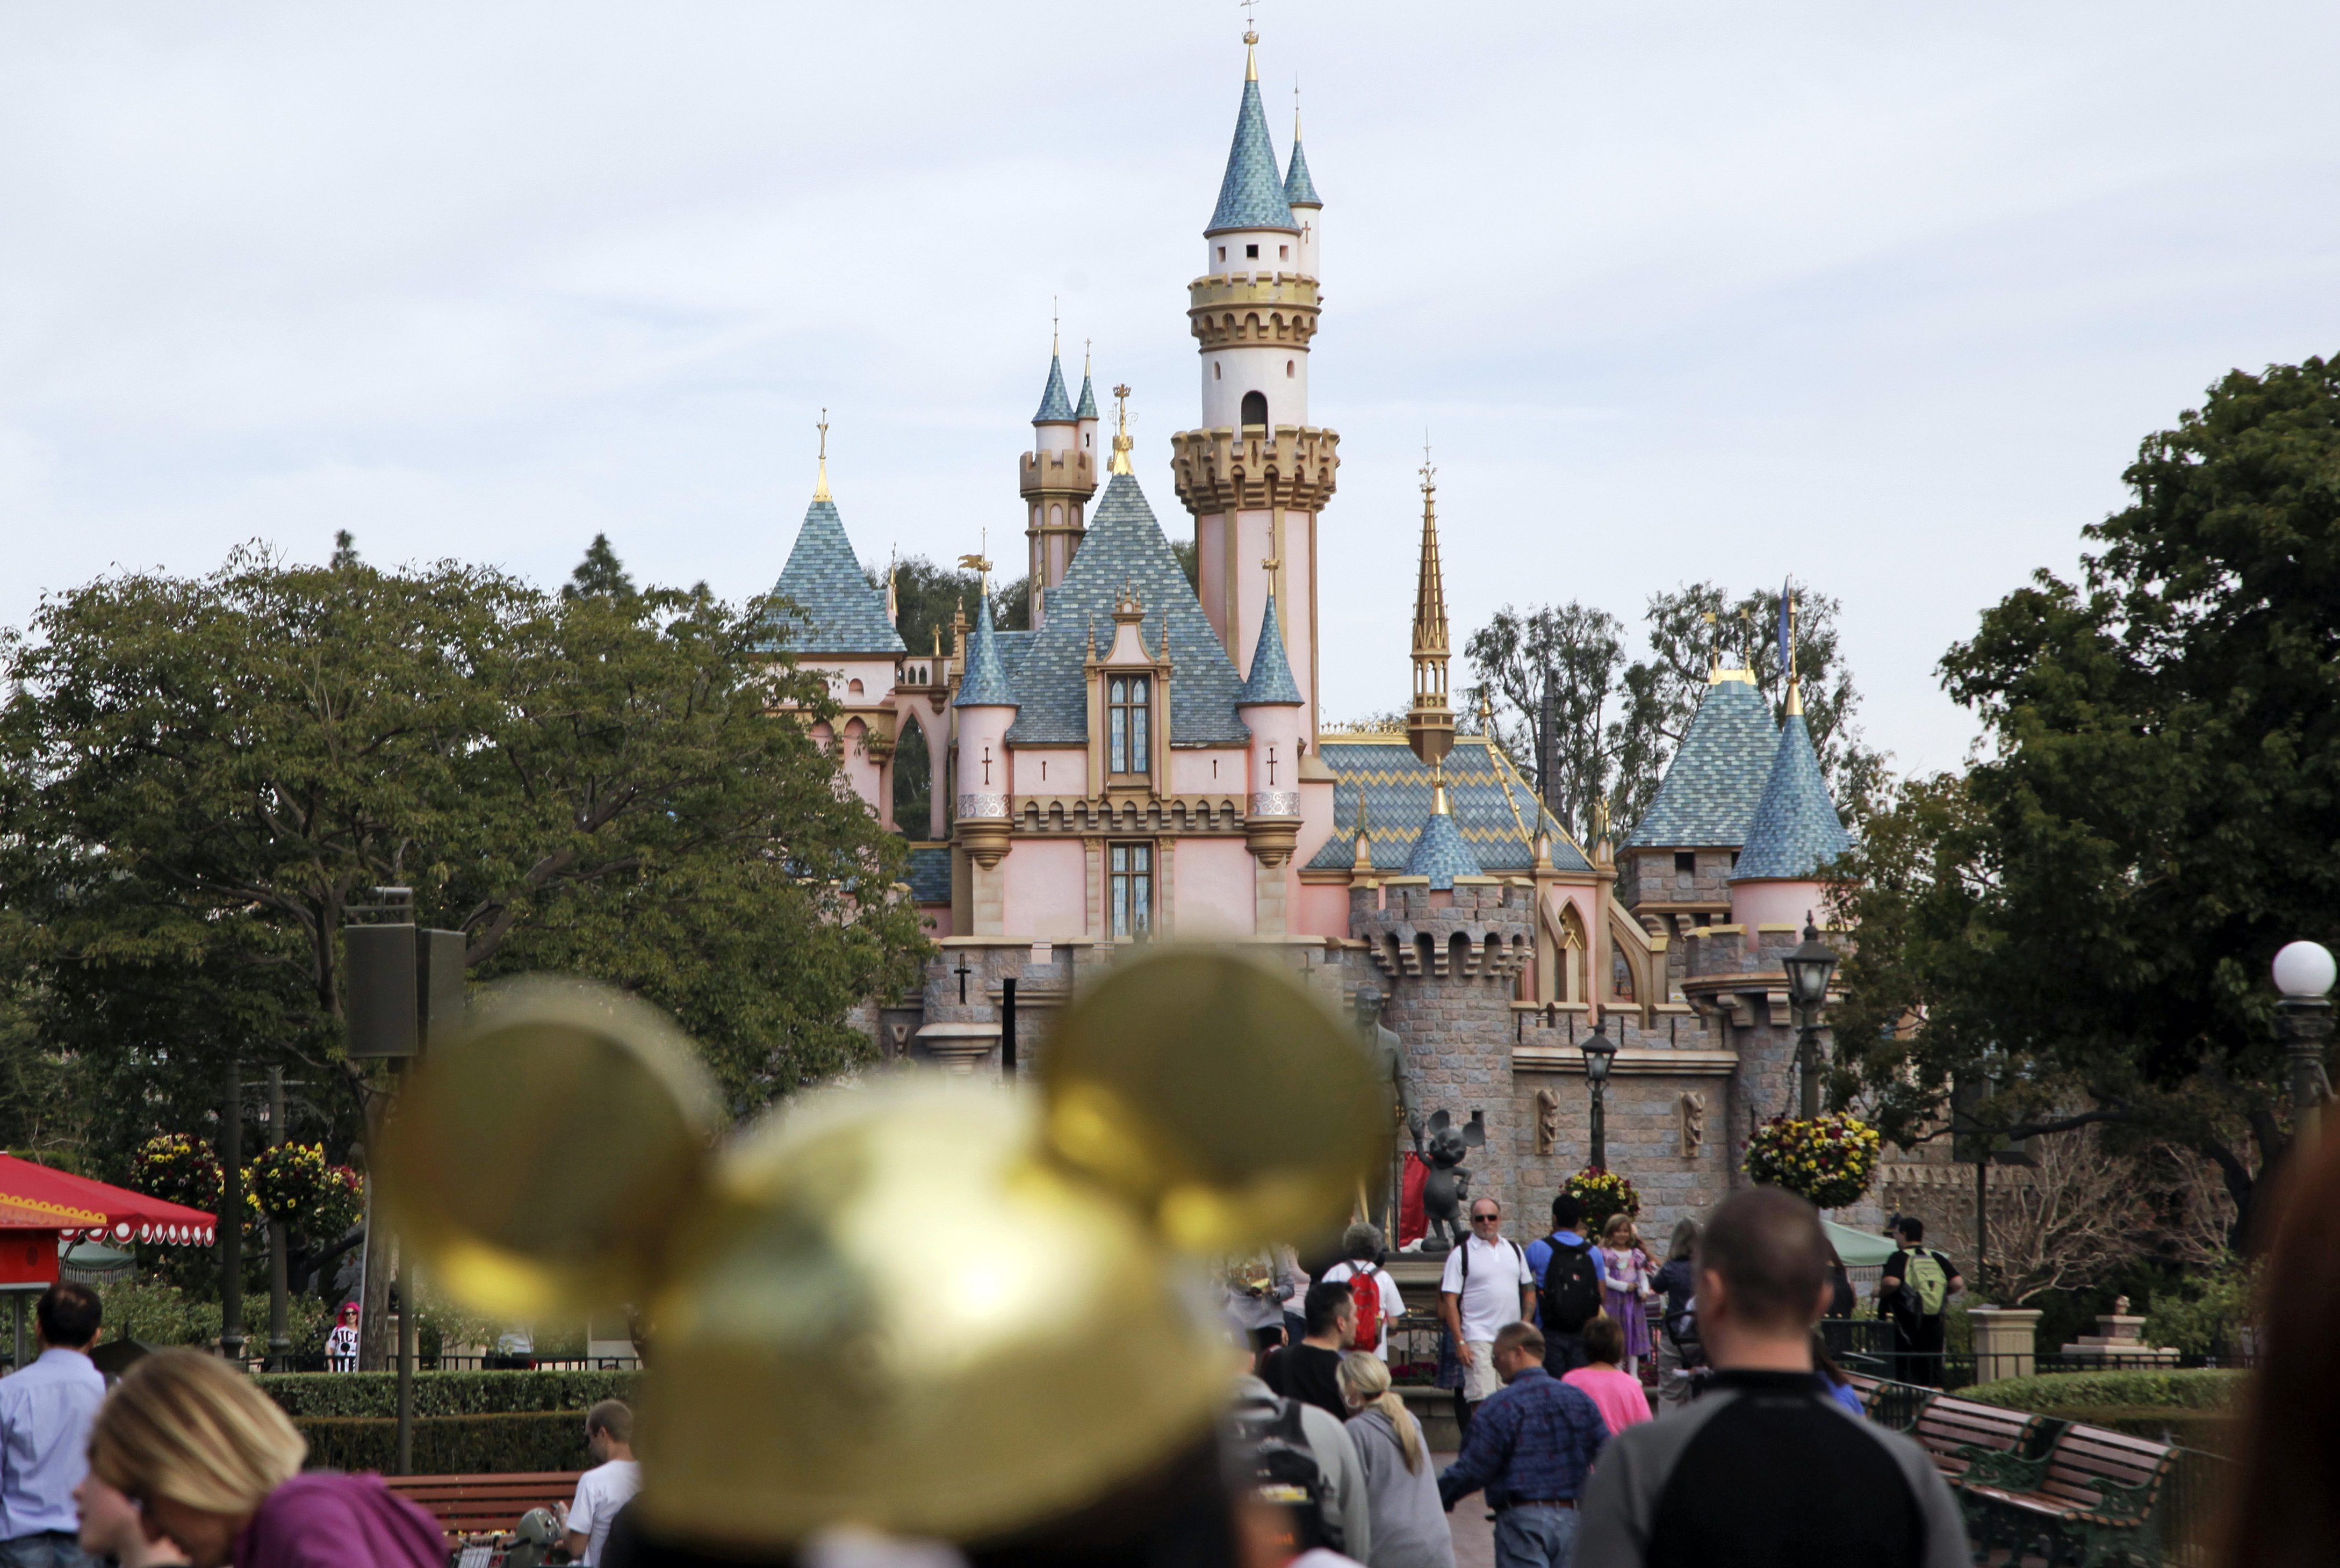 Theme Parks Could Reopen at Their Own Discretion